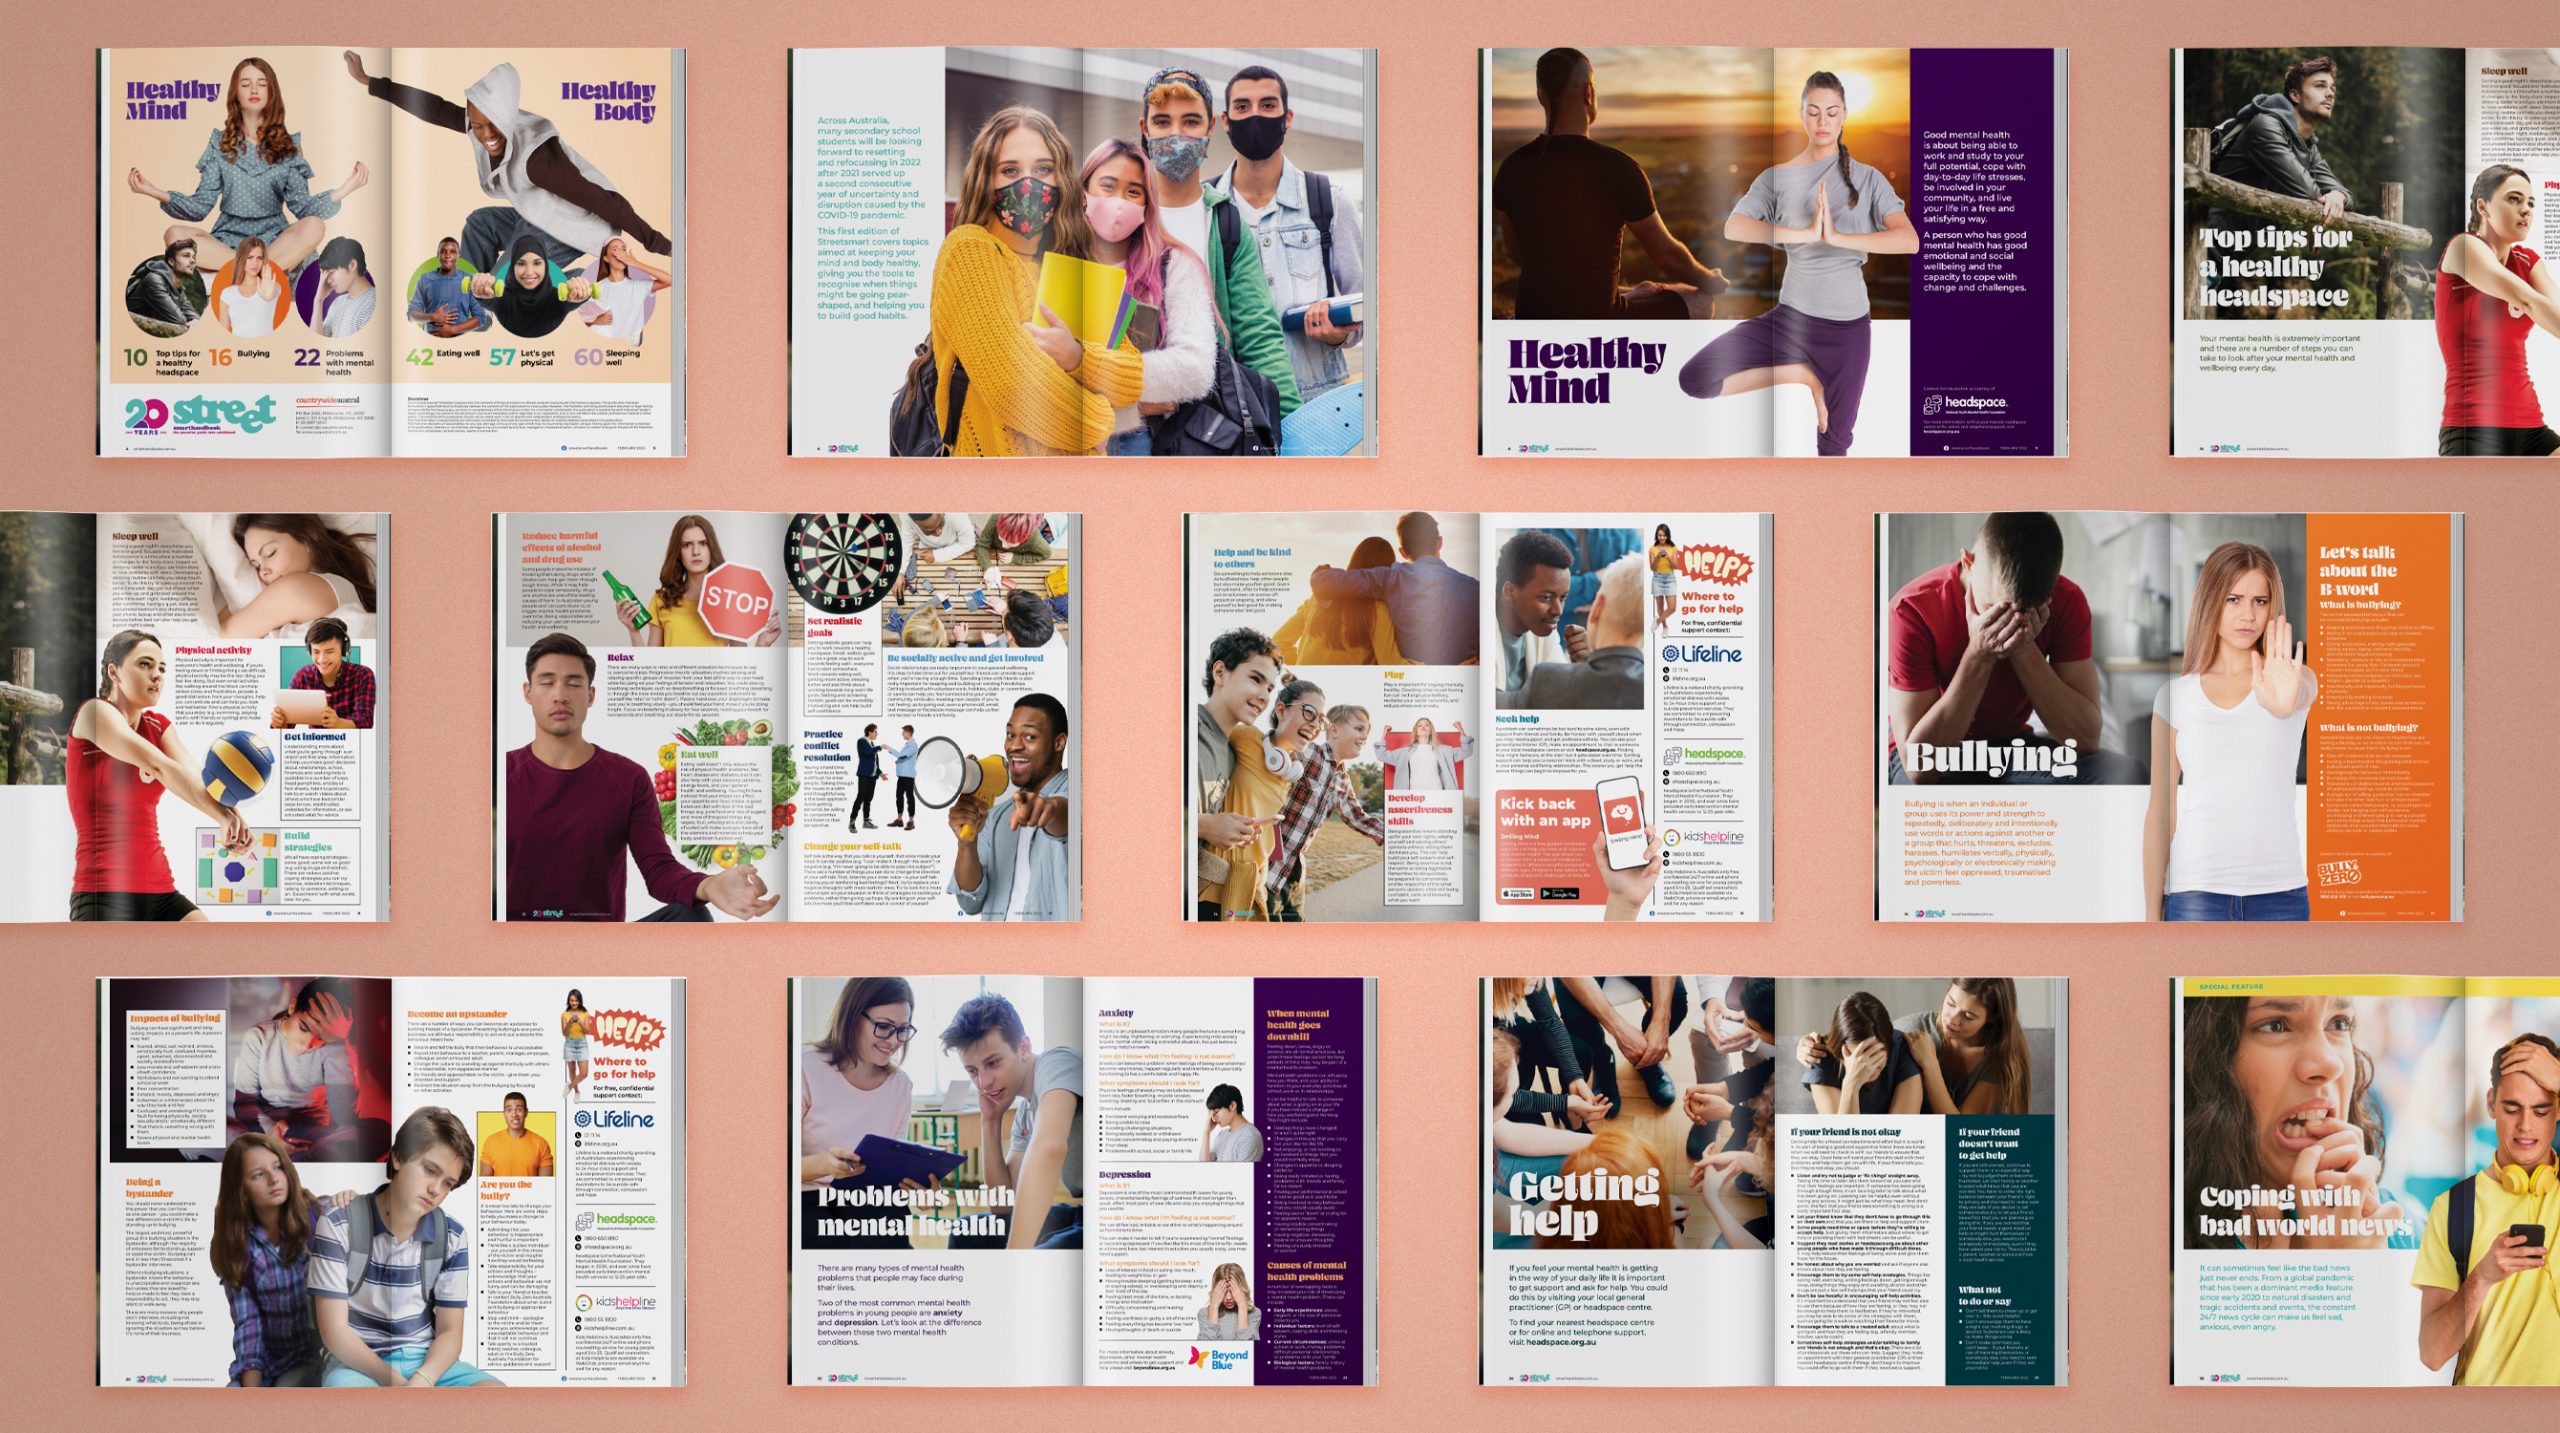 Interior spreads from the Streetsmart Handbook chapters including Healthy Mind, Healthy Headspace, Bullying, Mental Health, Getting Help and Coping with Bad World News.